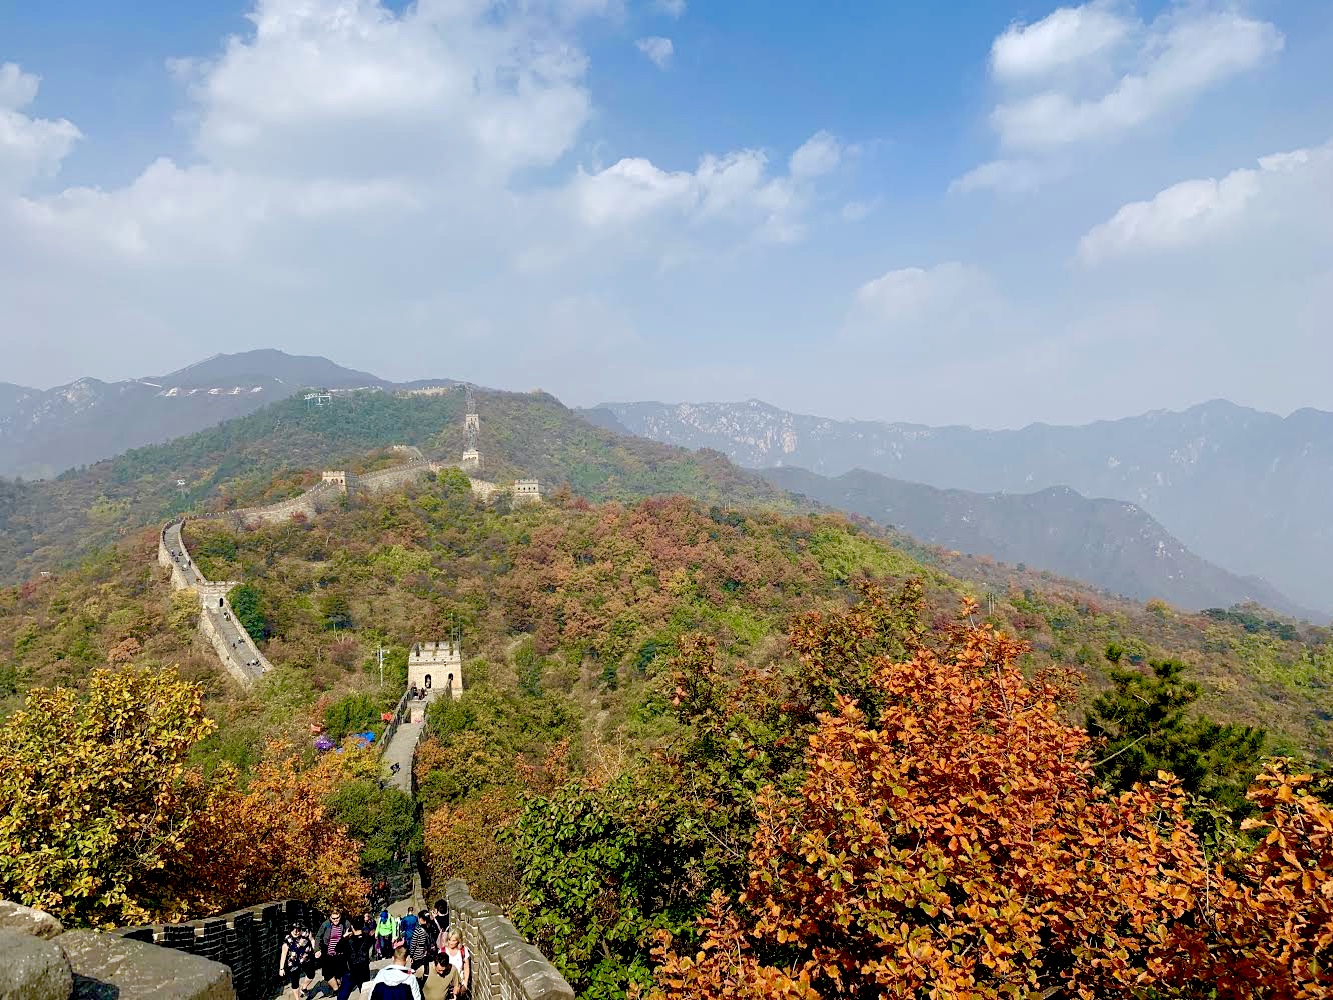 View of the great wall during autumn